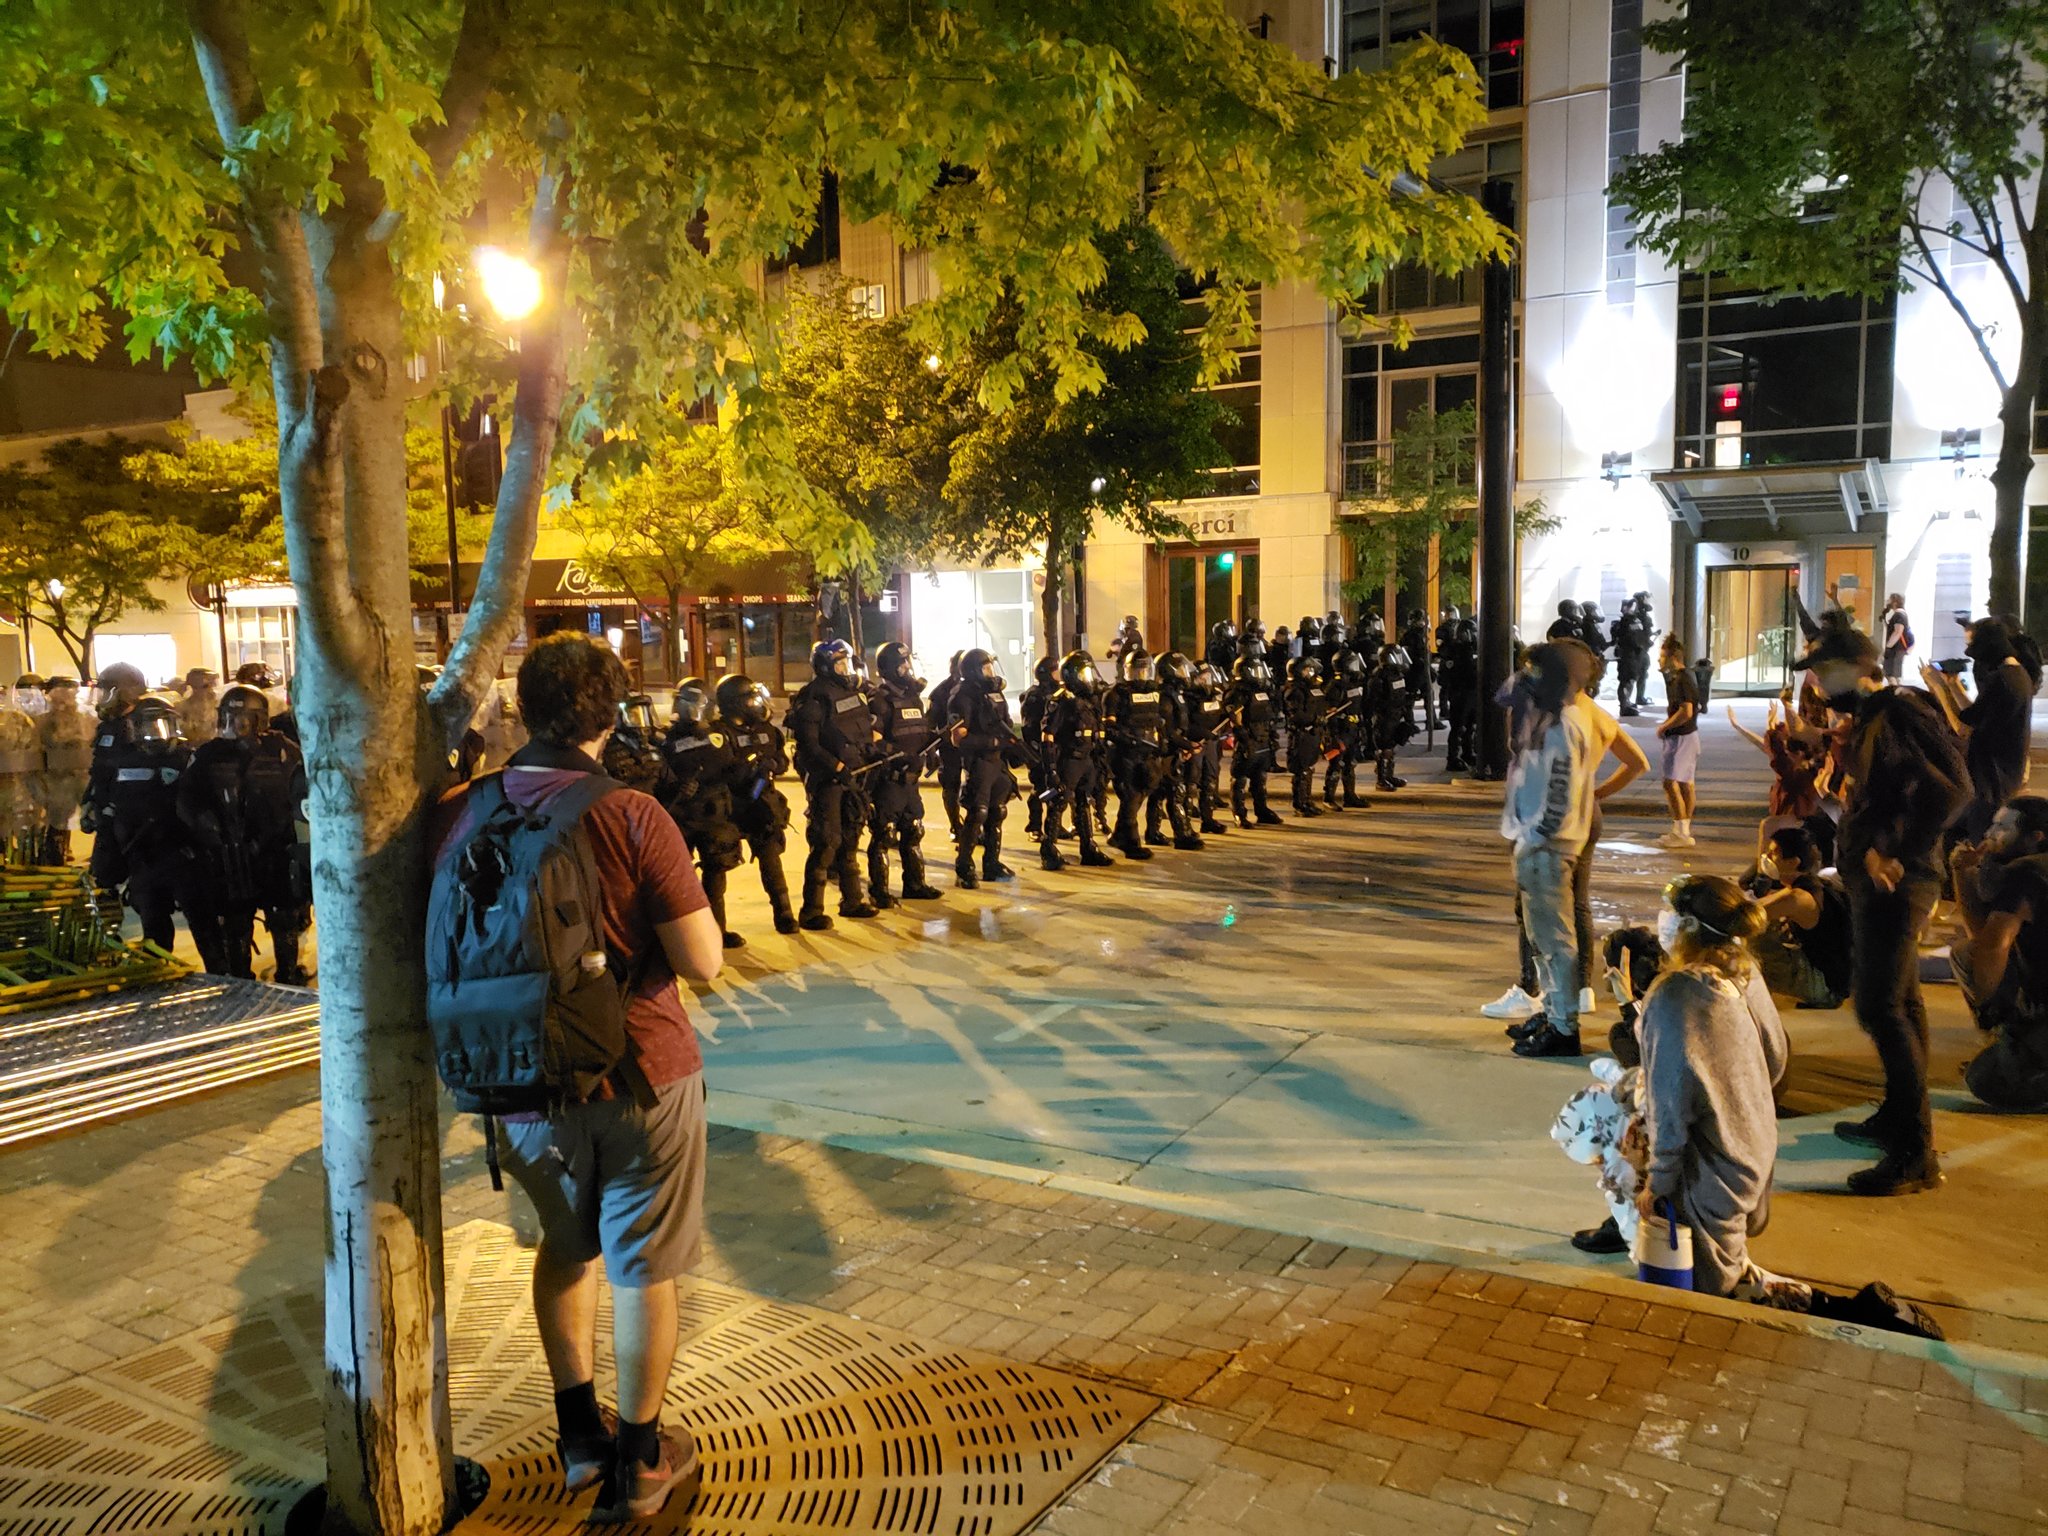 Police face off against protesters in downtown Madison on Sunday night.